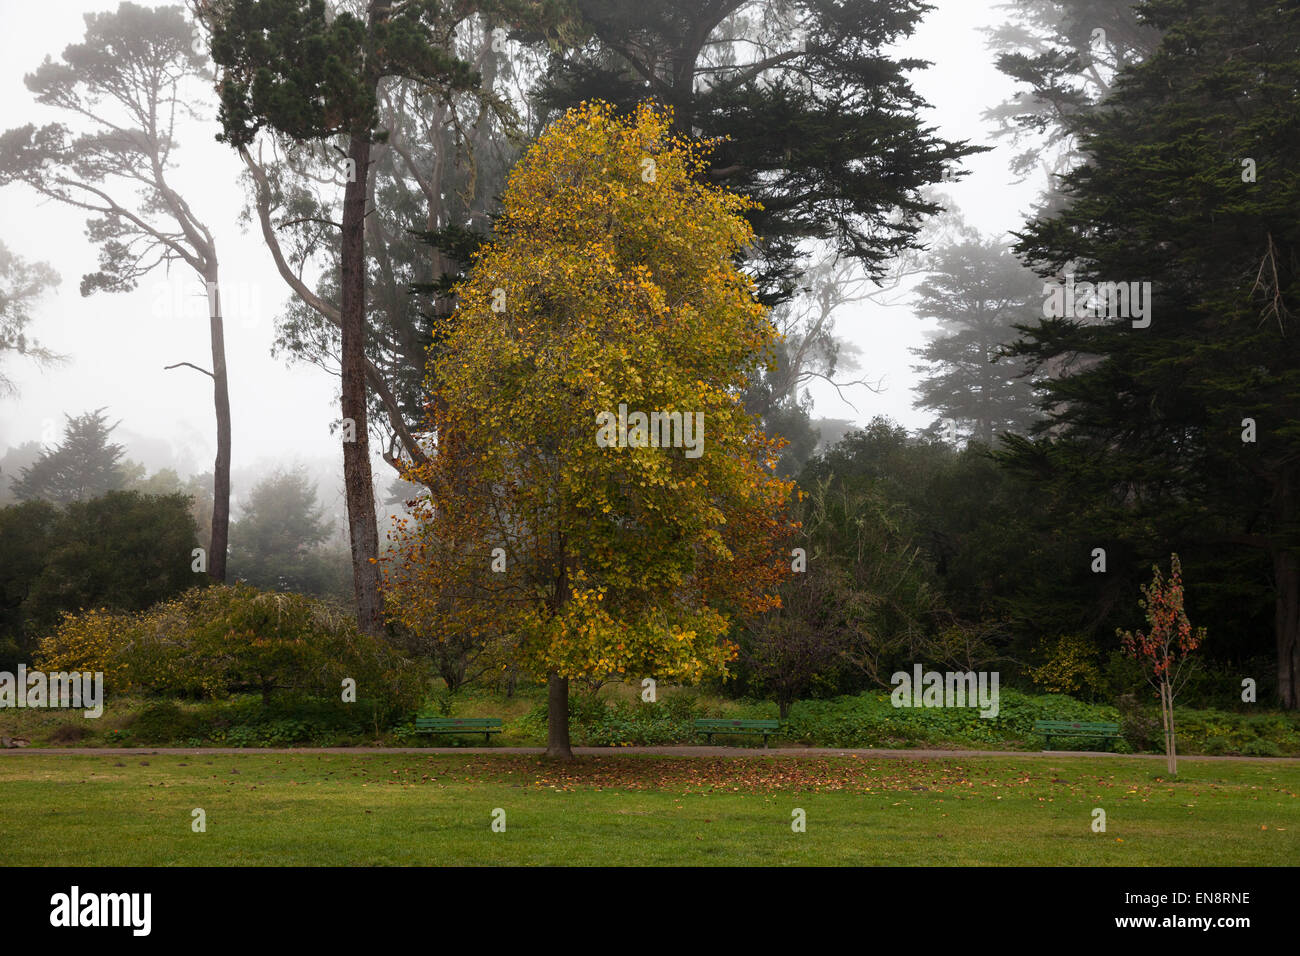 A tree whose leaves have turned golden brown on a foggy autumn day in the park with evergreens trees in the background. Stock Photo